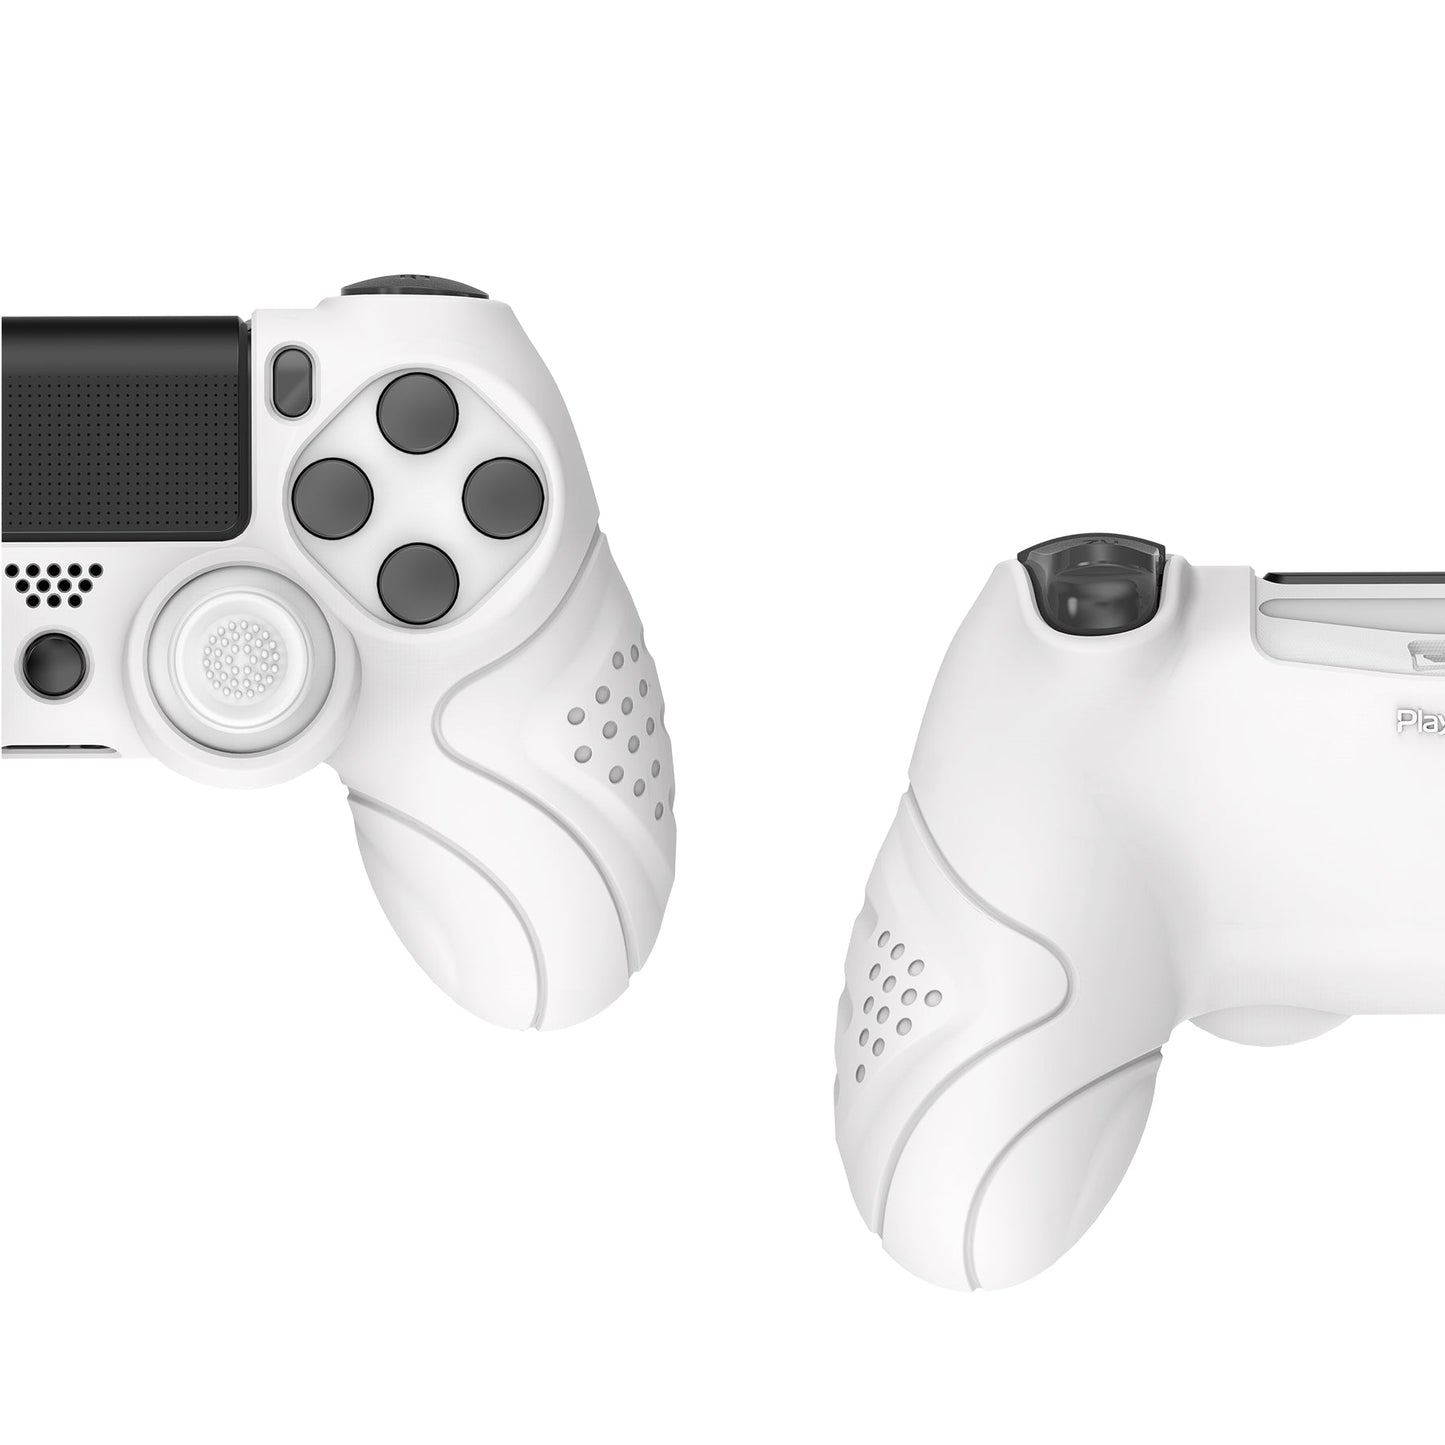 PlayVital Guardian Edition White Ergonomic Soft Anti-Slip Controller Silicone Case Cover for PS4, Rubber Protector Skins with white Joystick Caps for PS4 Slim PS4 Pro Controller - P4CC0060 playvital